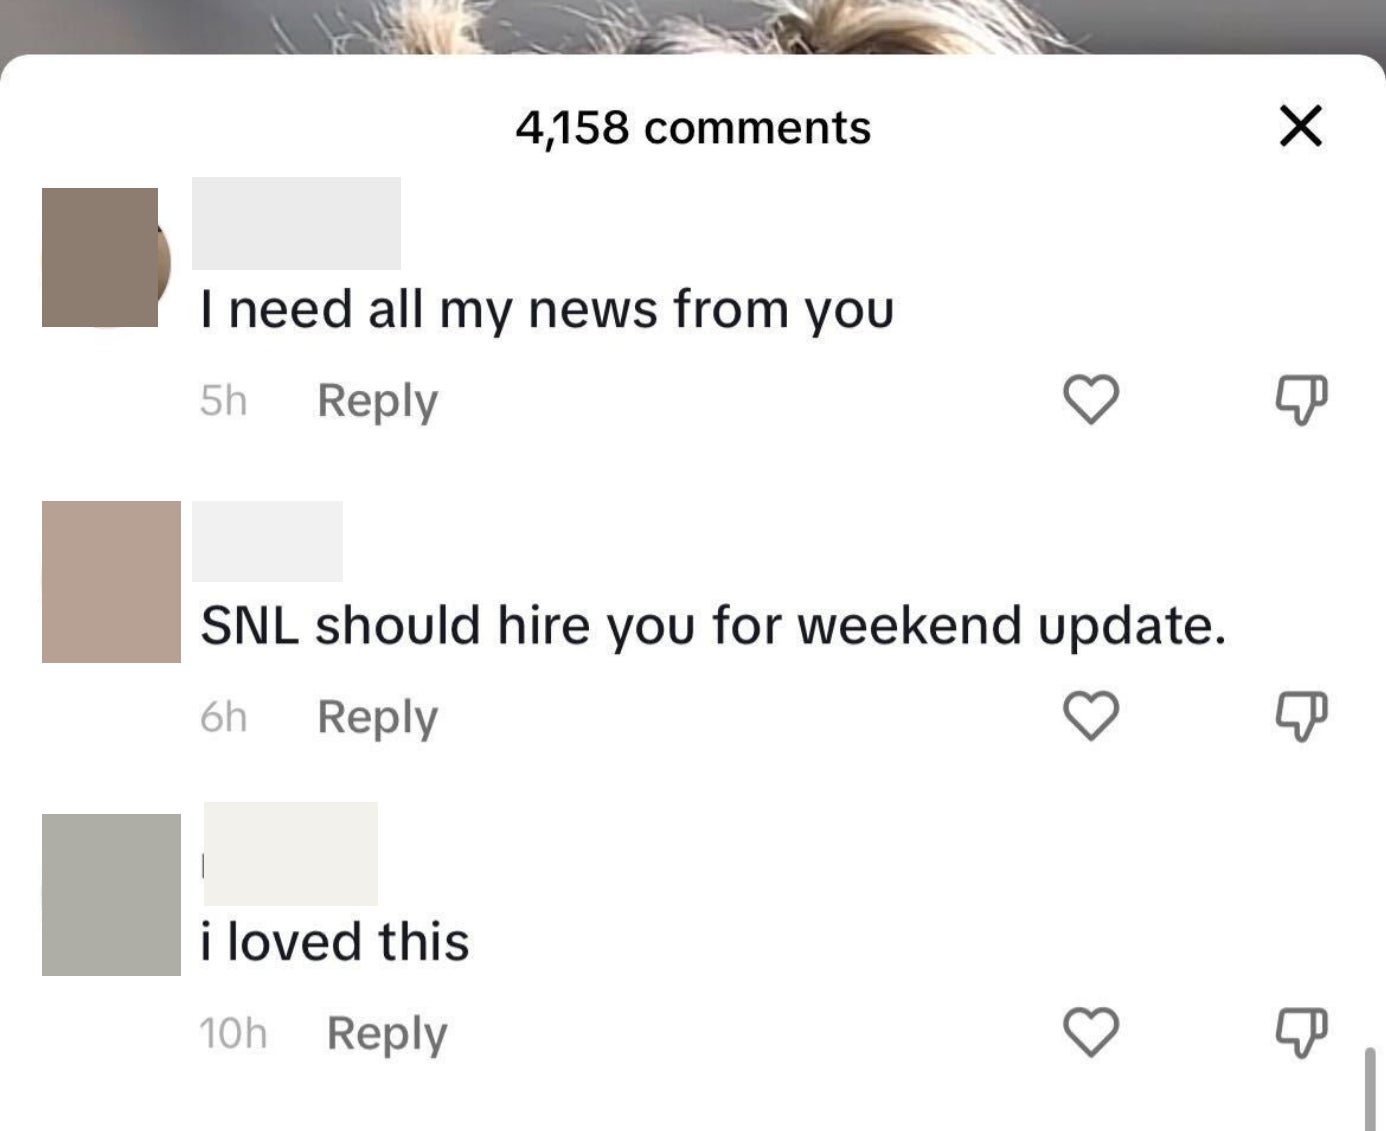 Comments saying &quot;I loved this,&quot; &quot;SNL should hire you for weekend update,&quot; and &quot;I need all my news from you&quot;